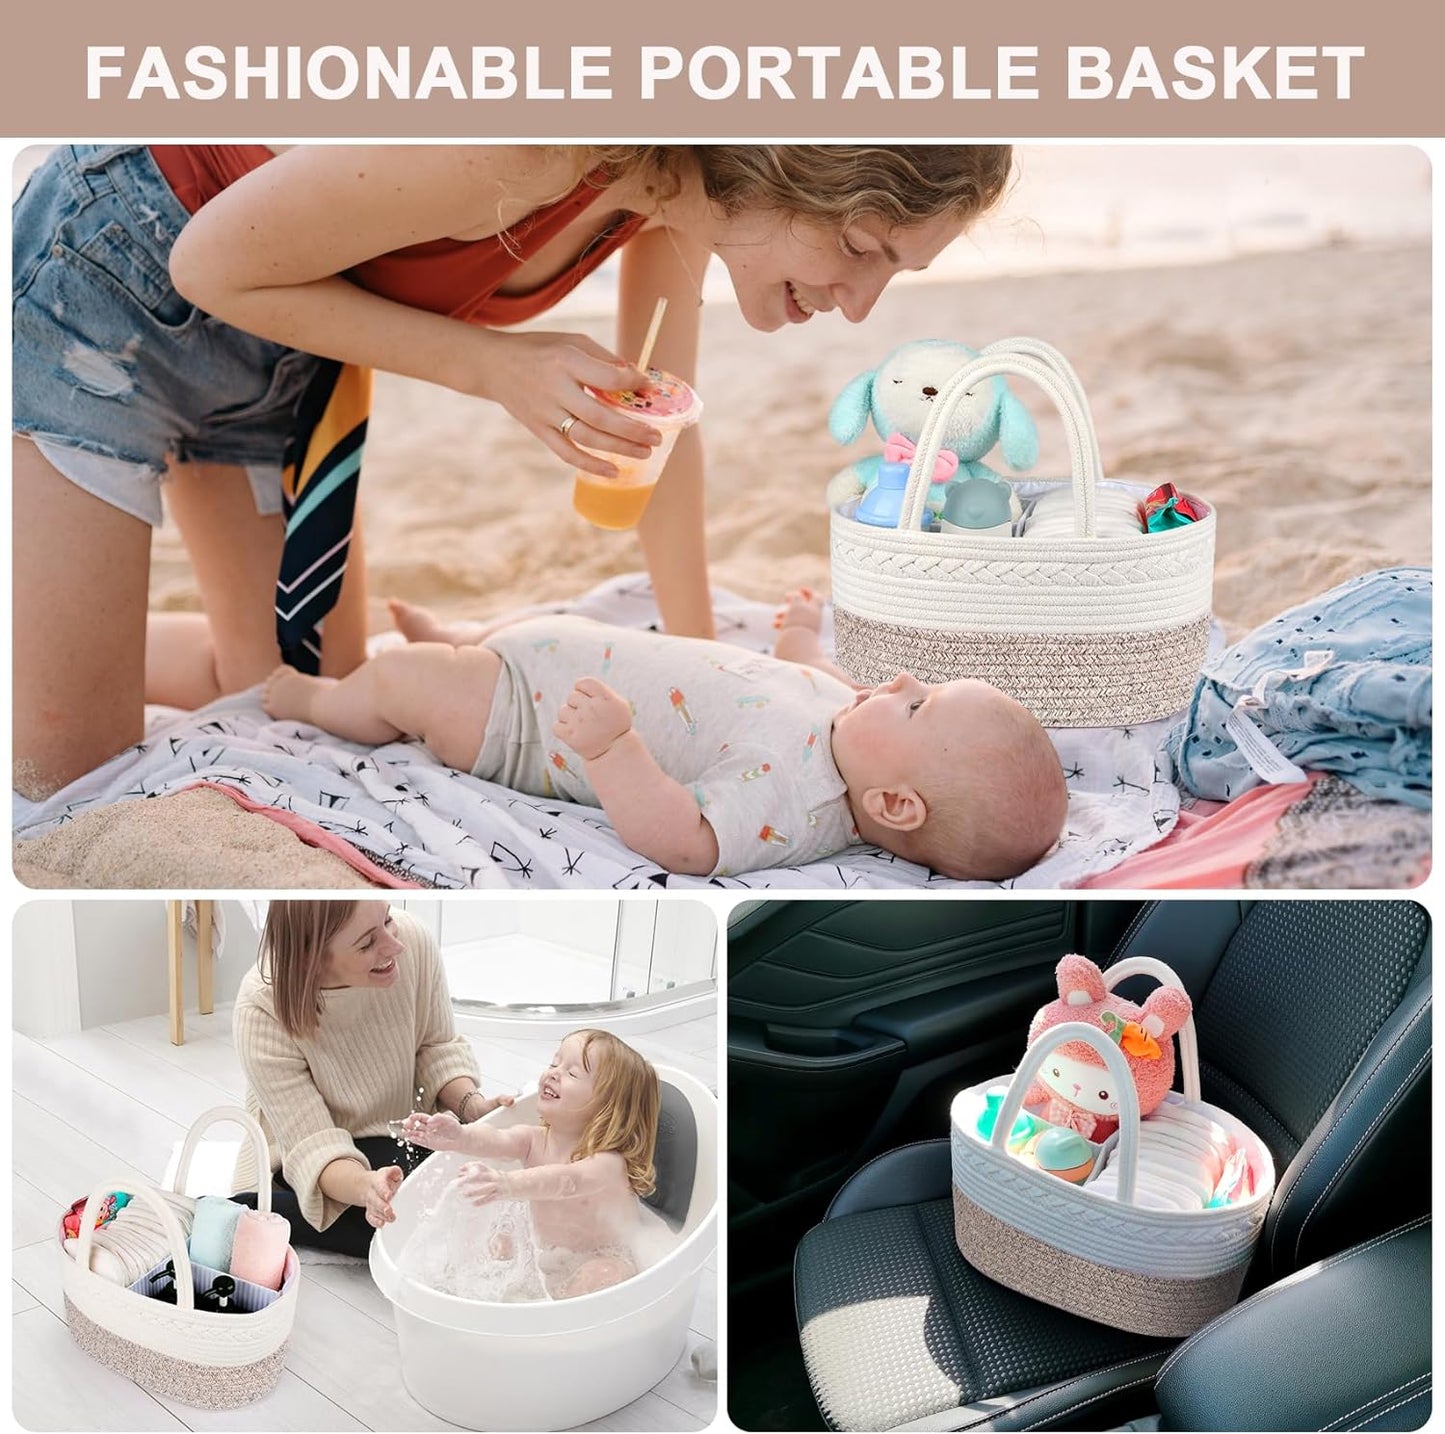 ABenkle Baby Diaper Caddy, Nursery Storage Bin and Car Organizer for Diapers Wipes, Cotton Rope Basket Changing Table Caddy